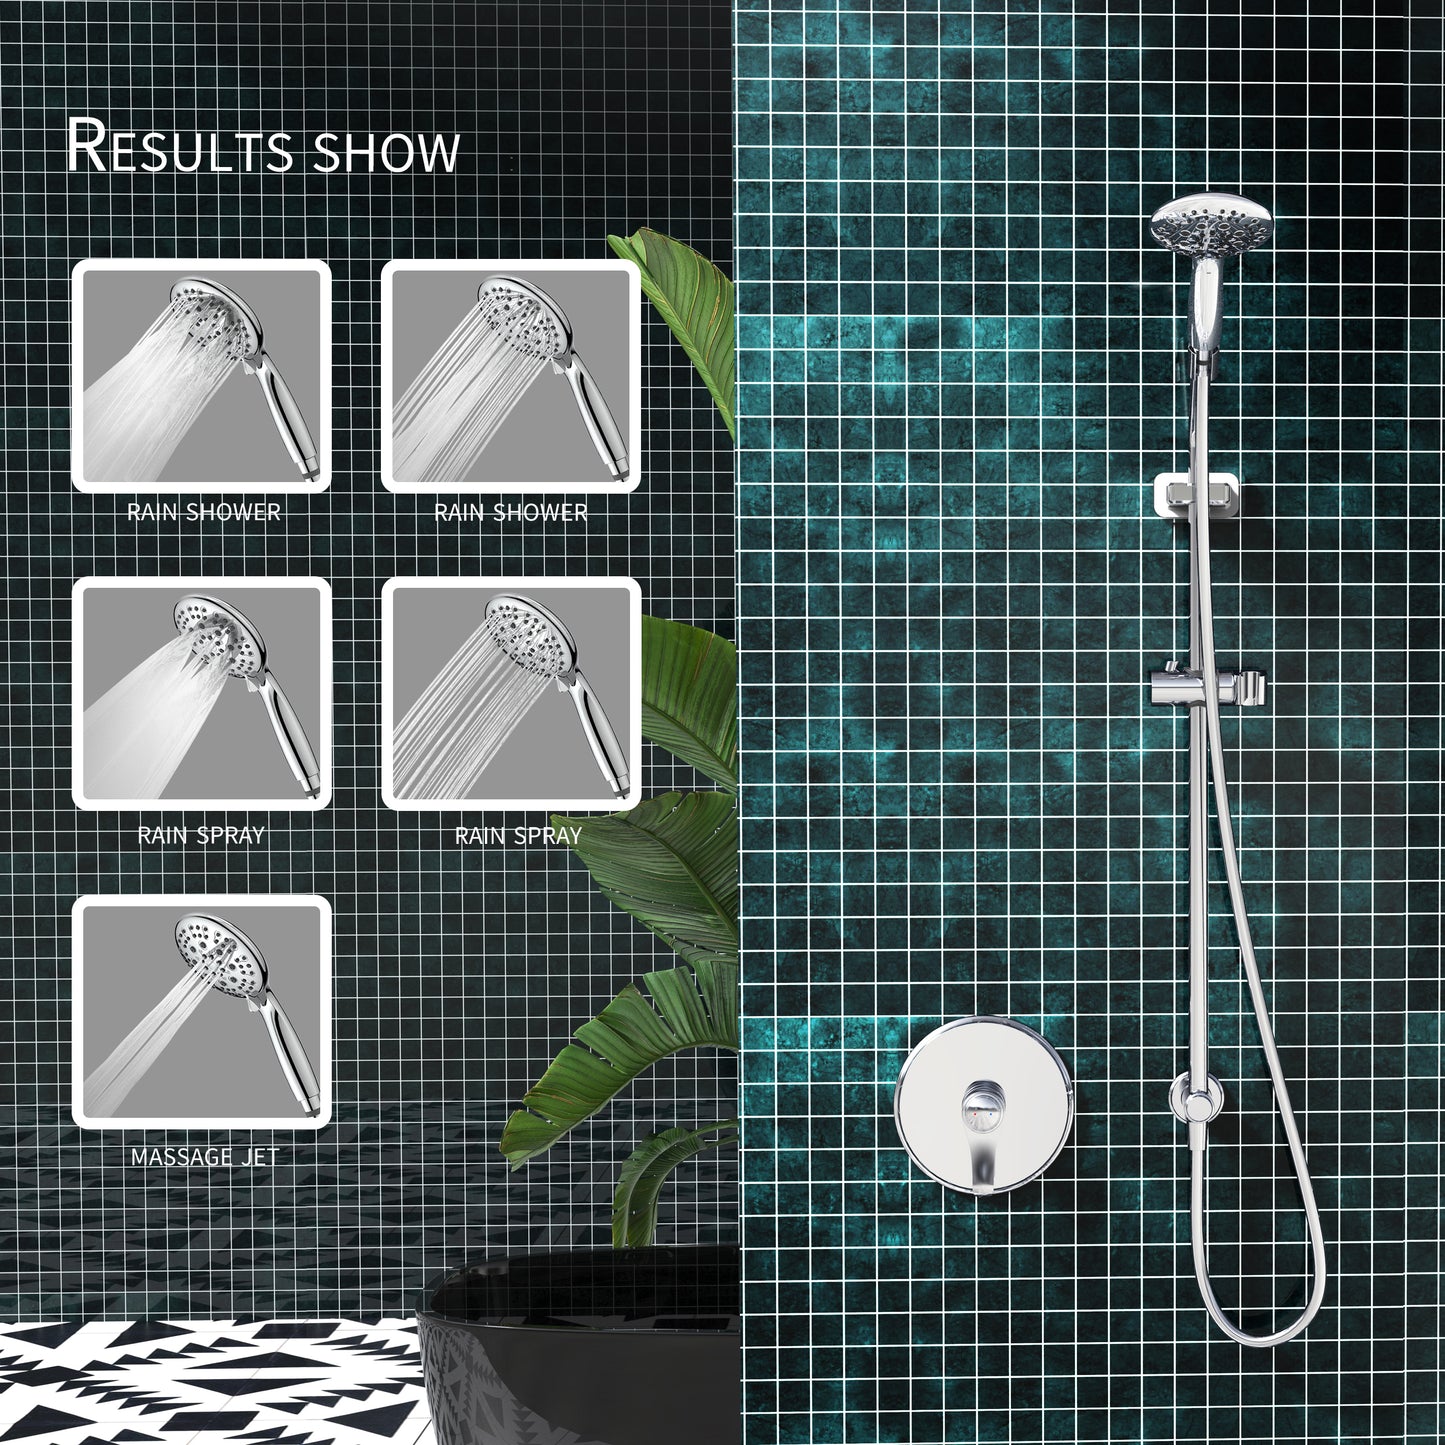 Large Amount of water Multi Function Shower Head - Shower System with 4." Rain Showerhead, 6-Function Hand Shower, Simple Style, Chrome